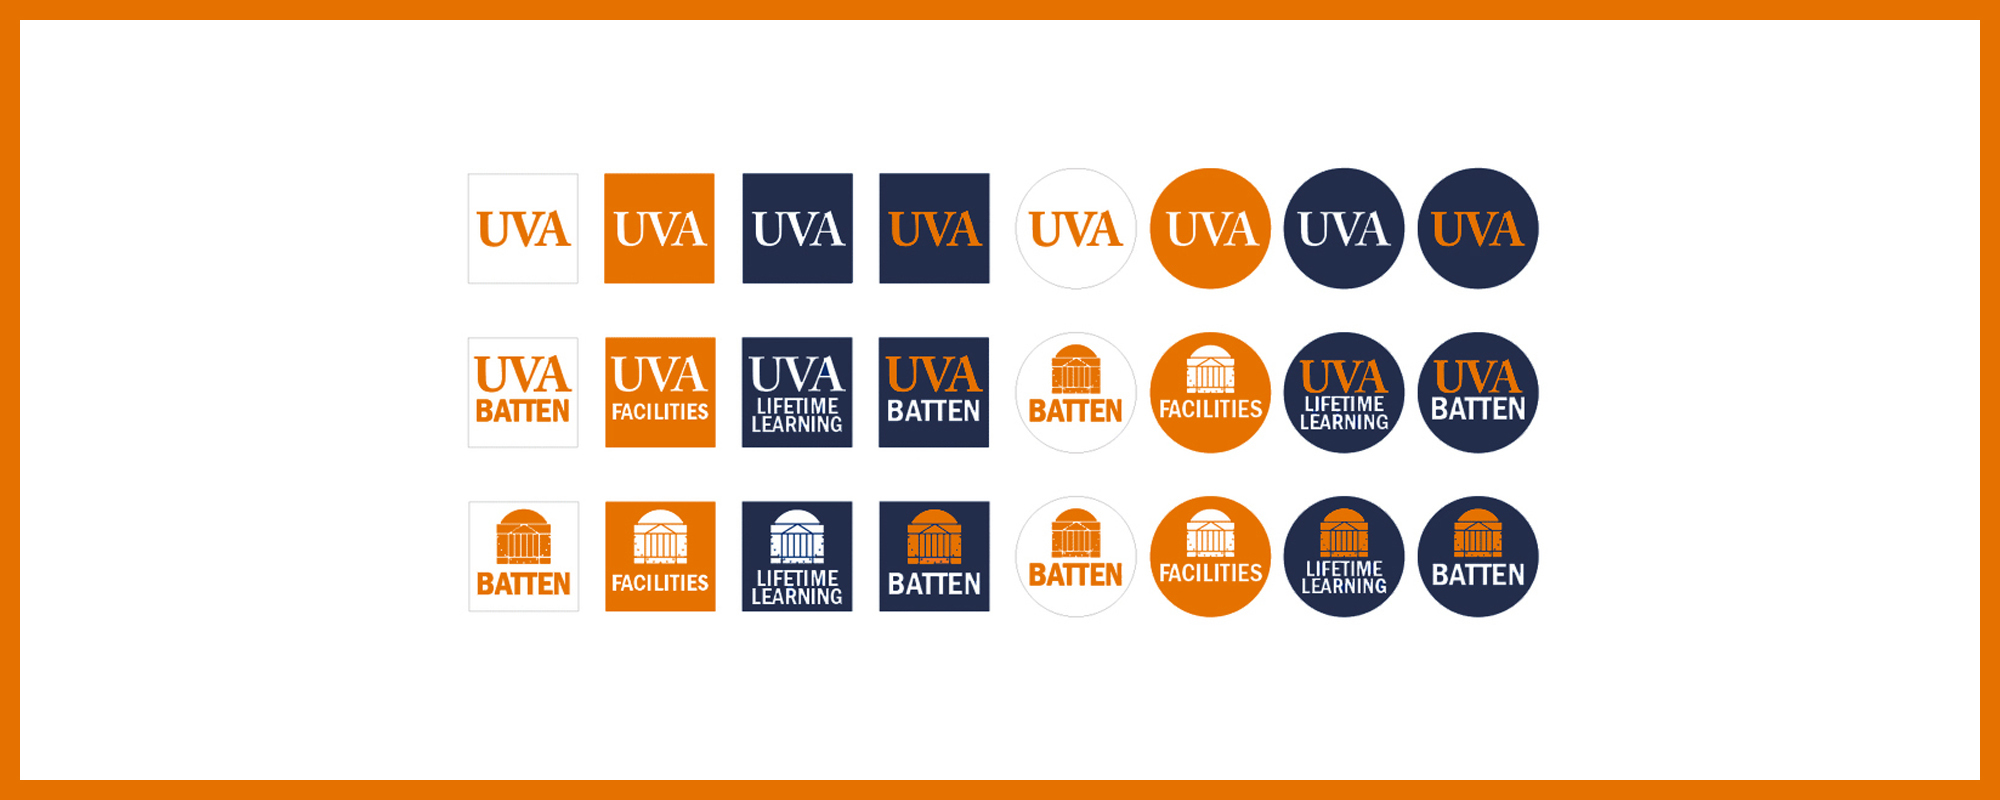 Collage of social media avatars that have the correct UVA monogram and colors. 